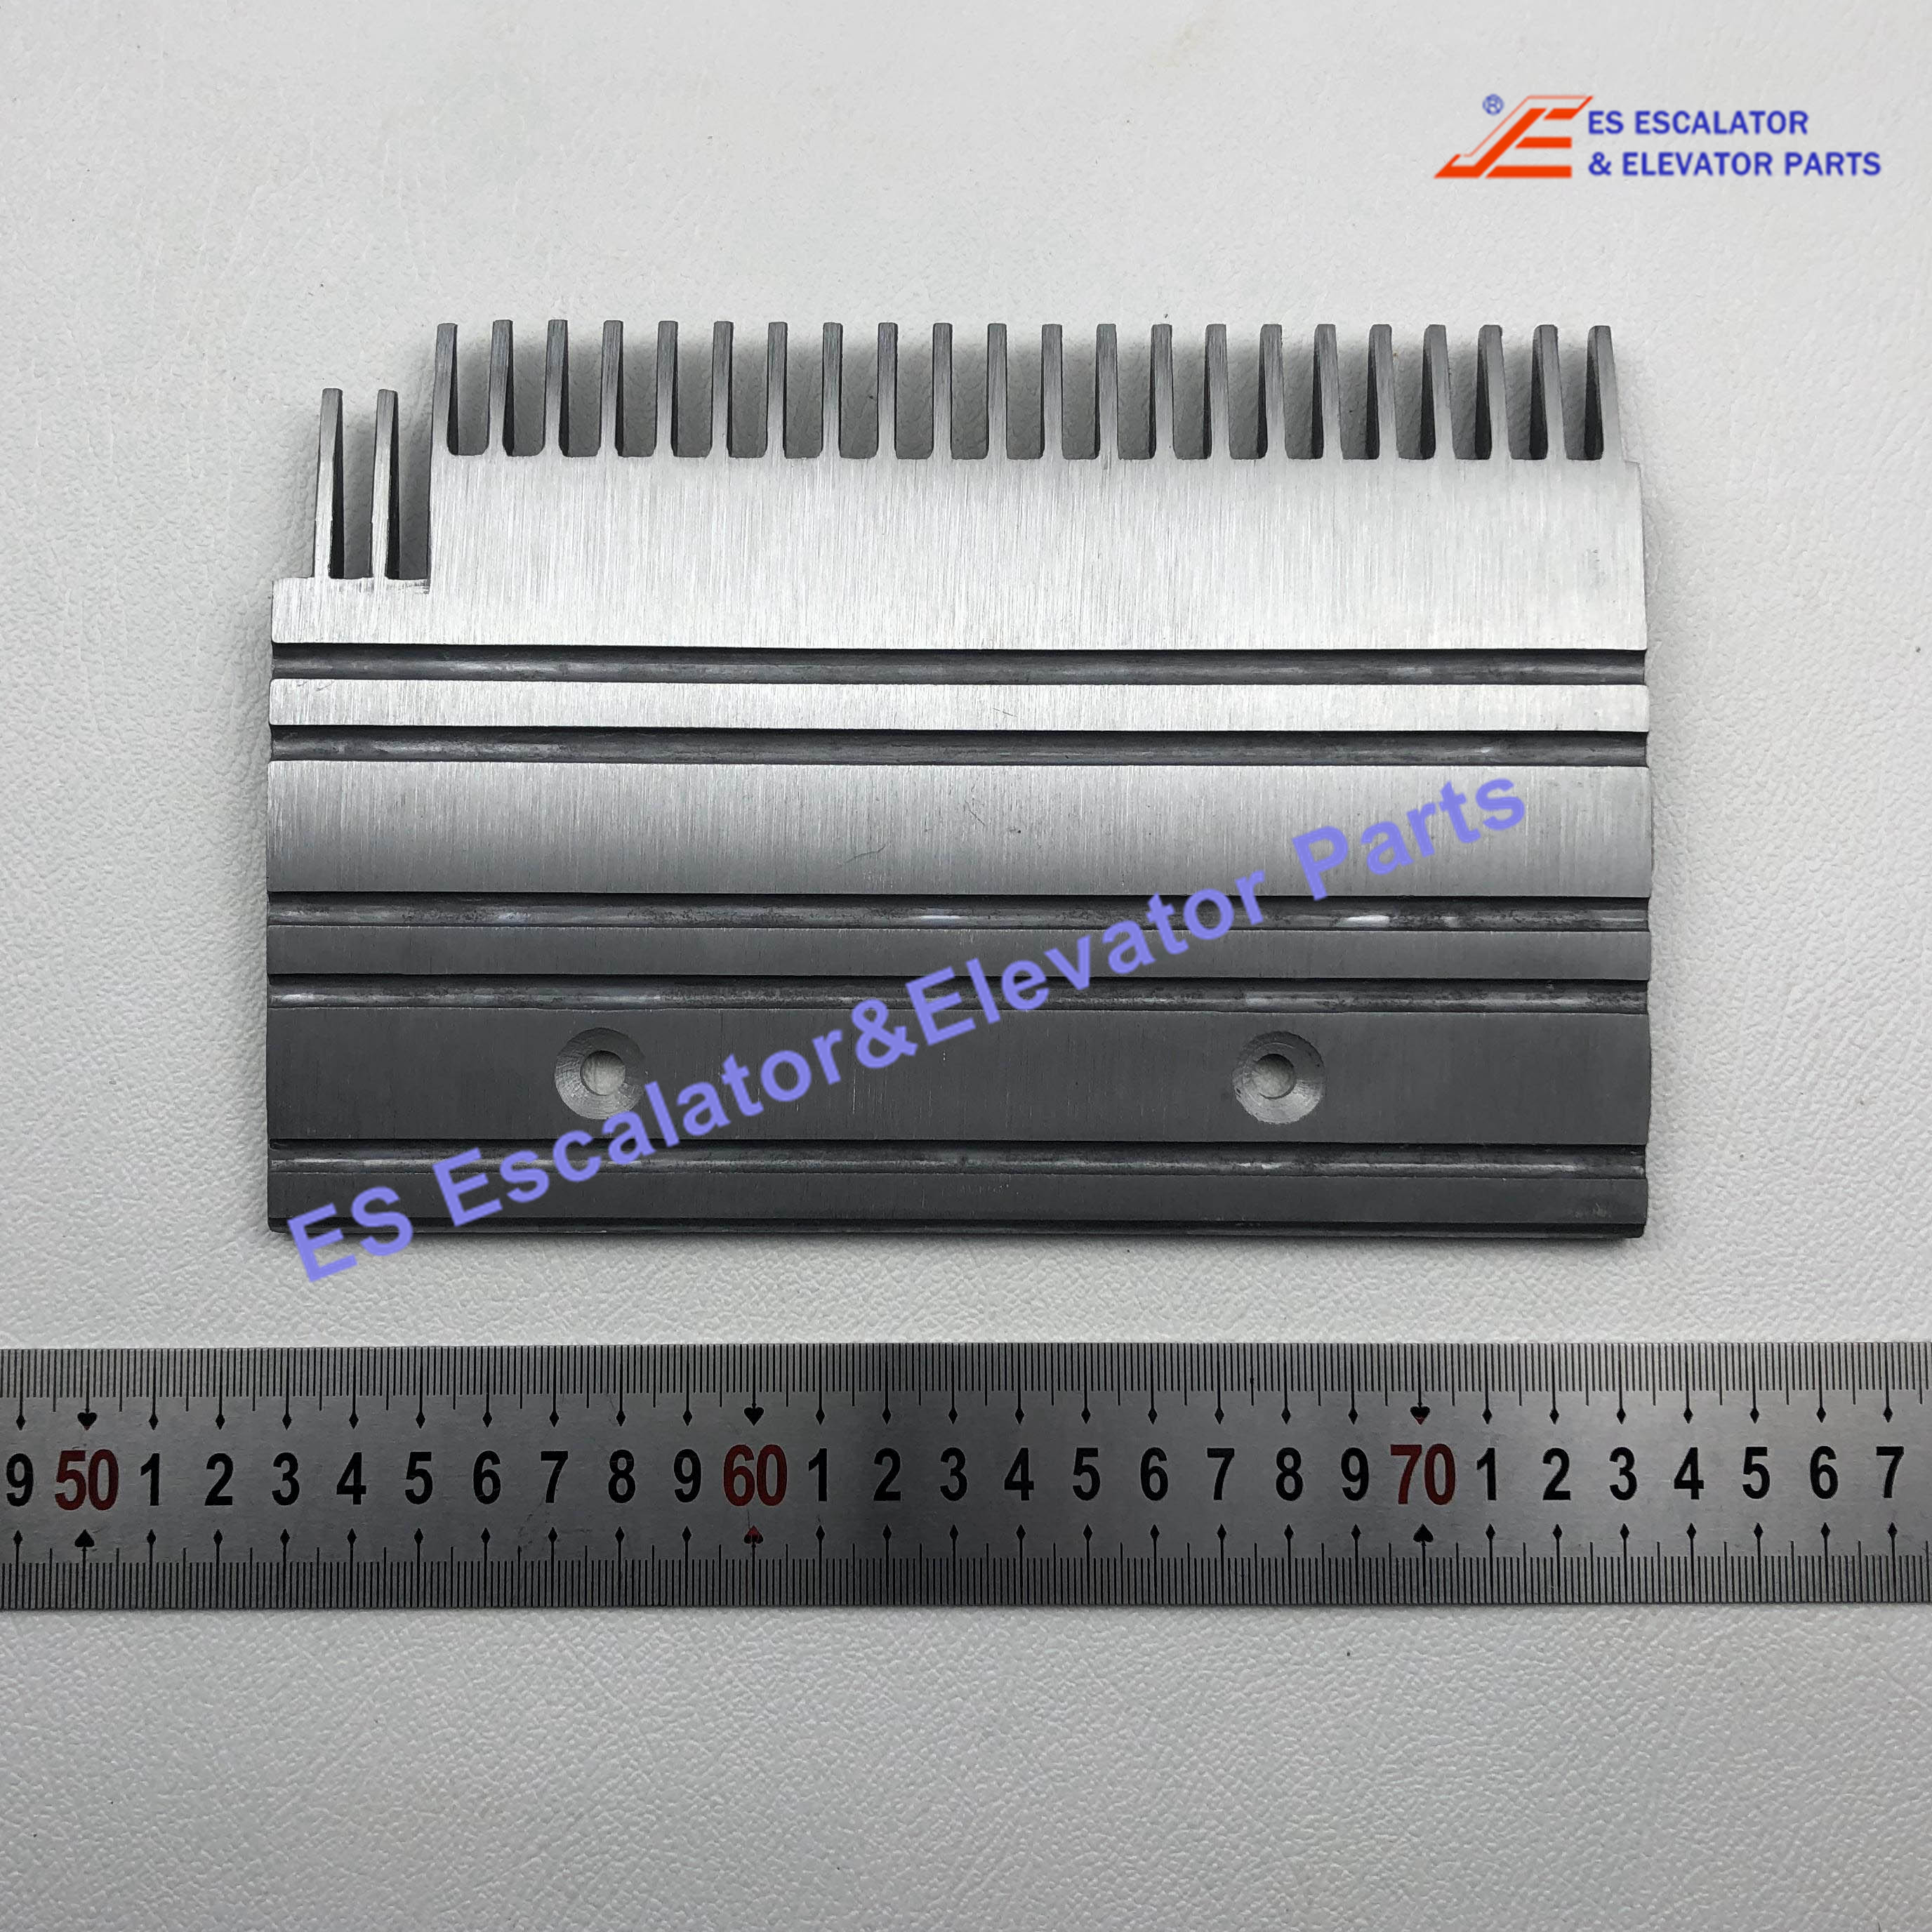 GAA453BM3 Escalator Comb Plate 206.39x139.2mm Tooth Pitch 8.4 Hole Spacing 101.7 24T Aluminum Use For Otis